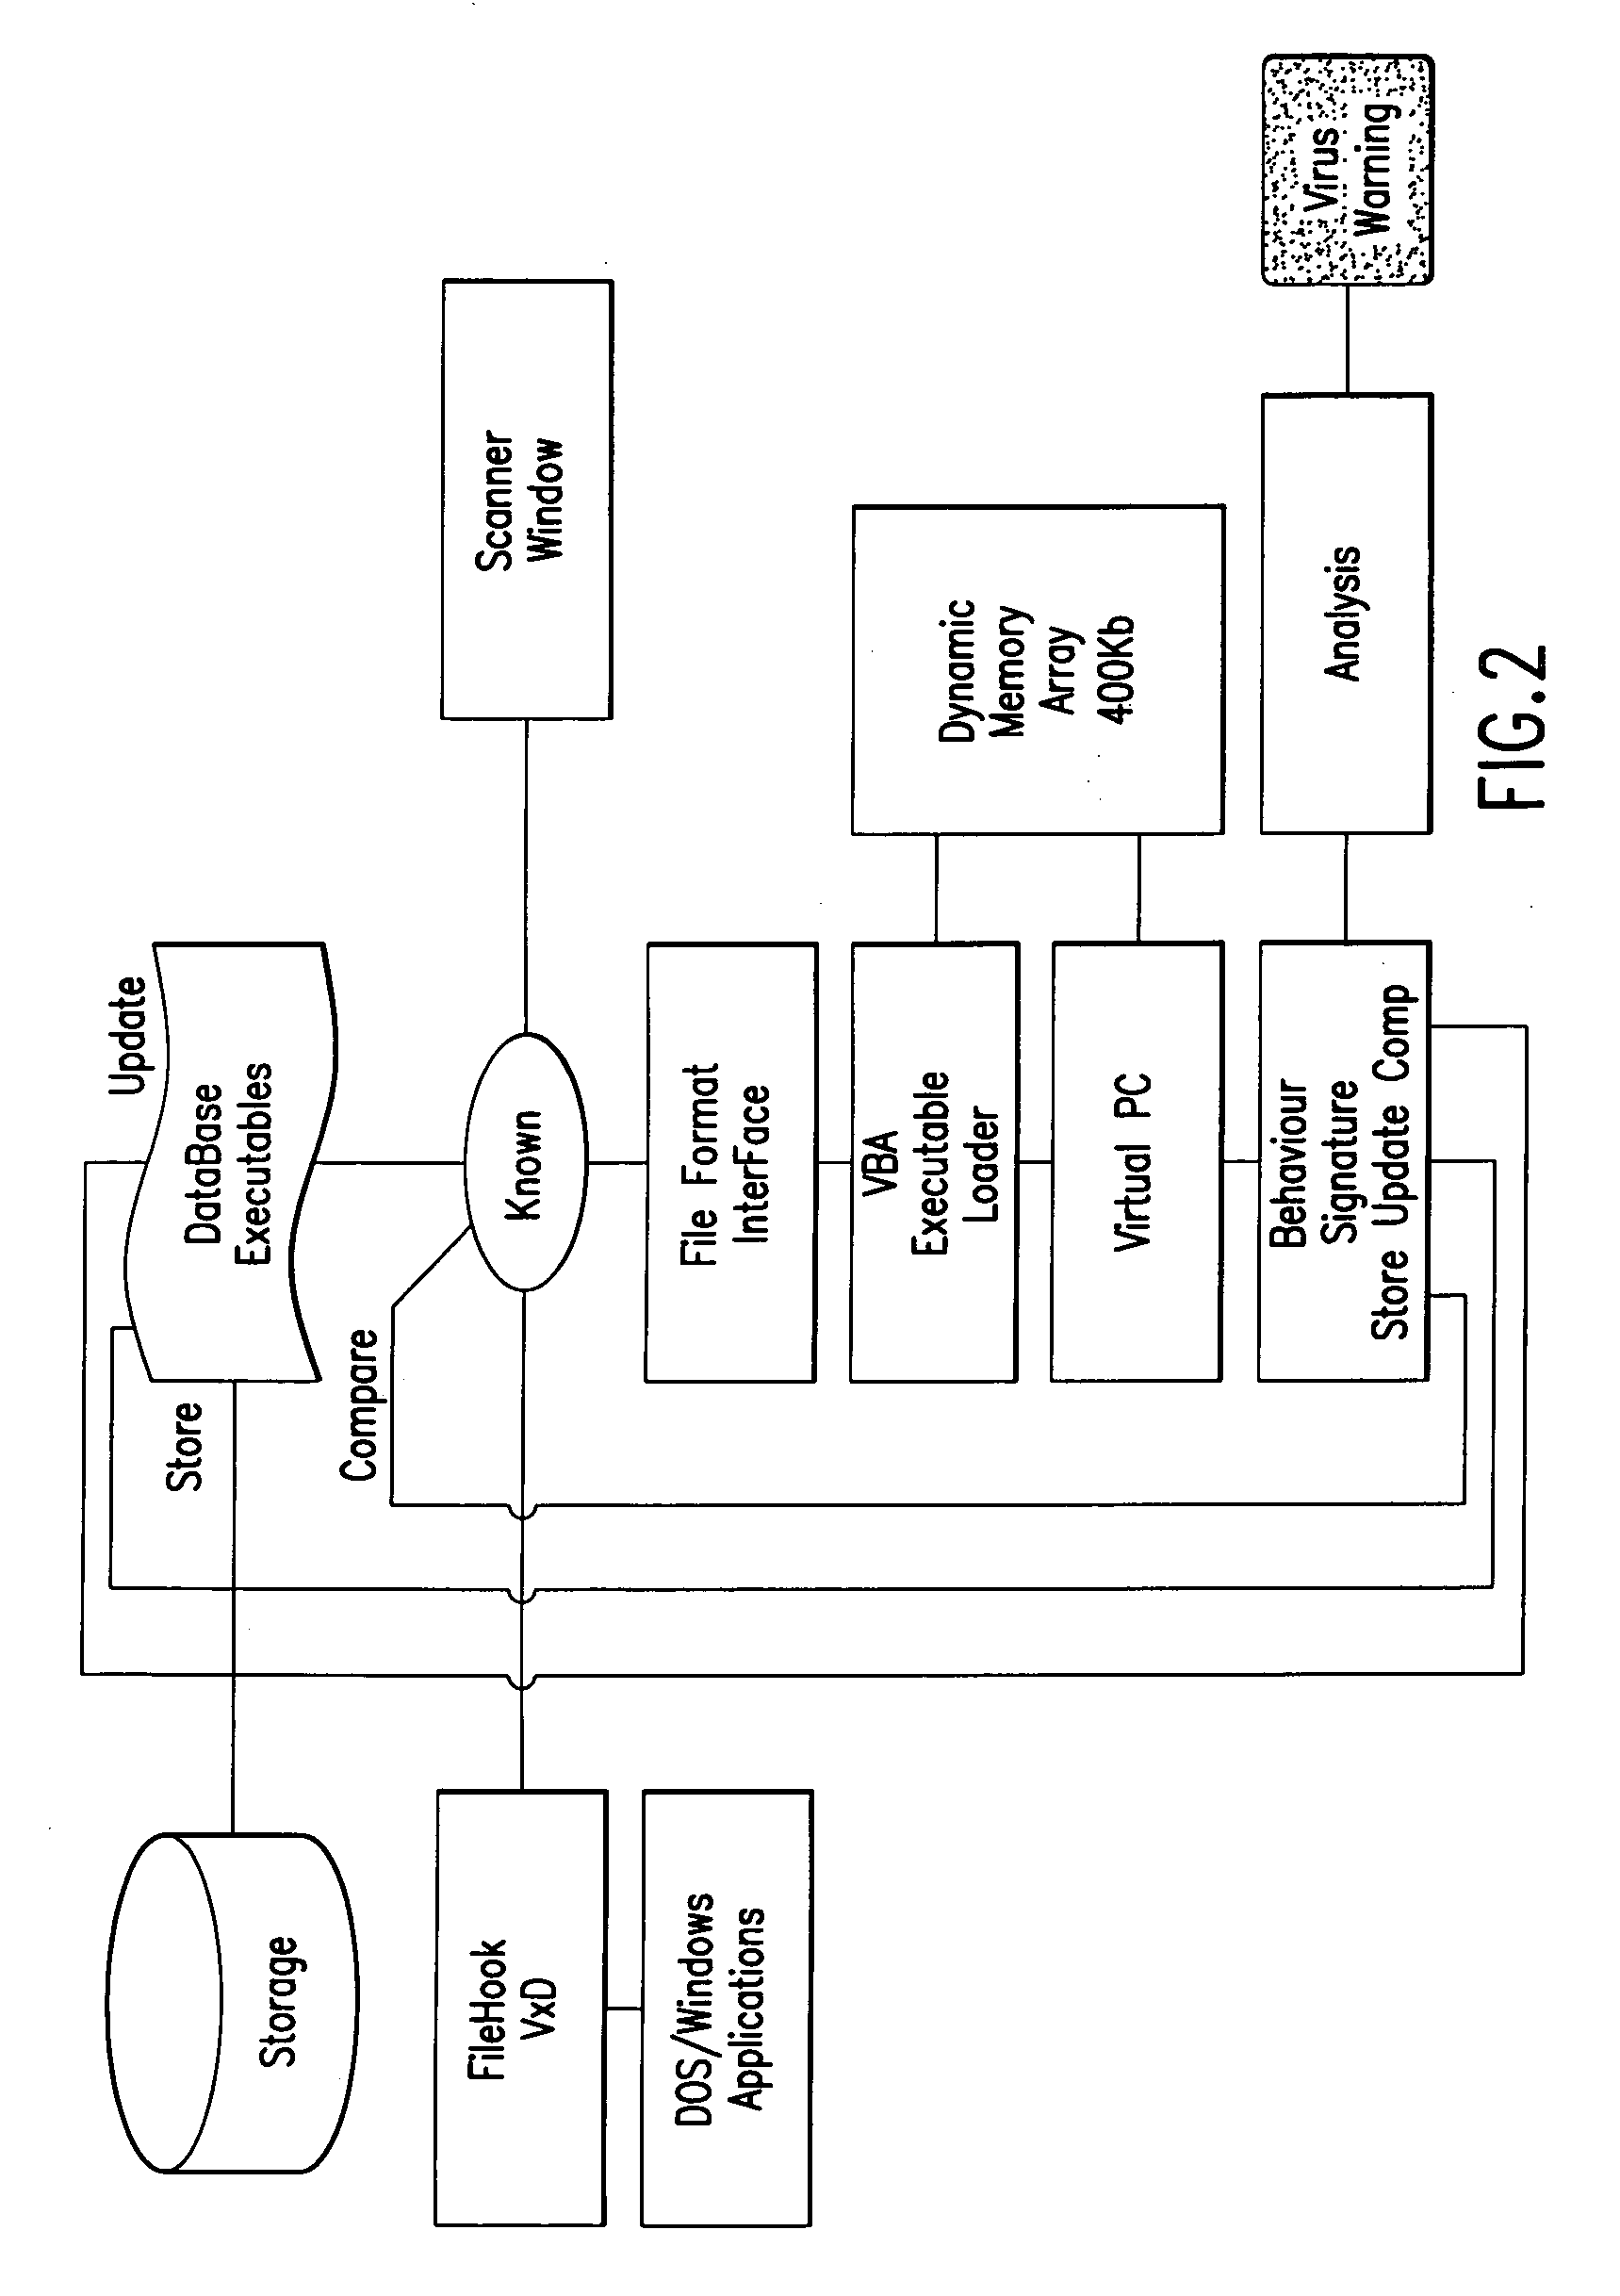 Computer immune system and method for detecting unwanted code in a computer system